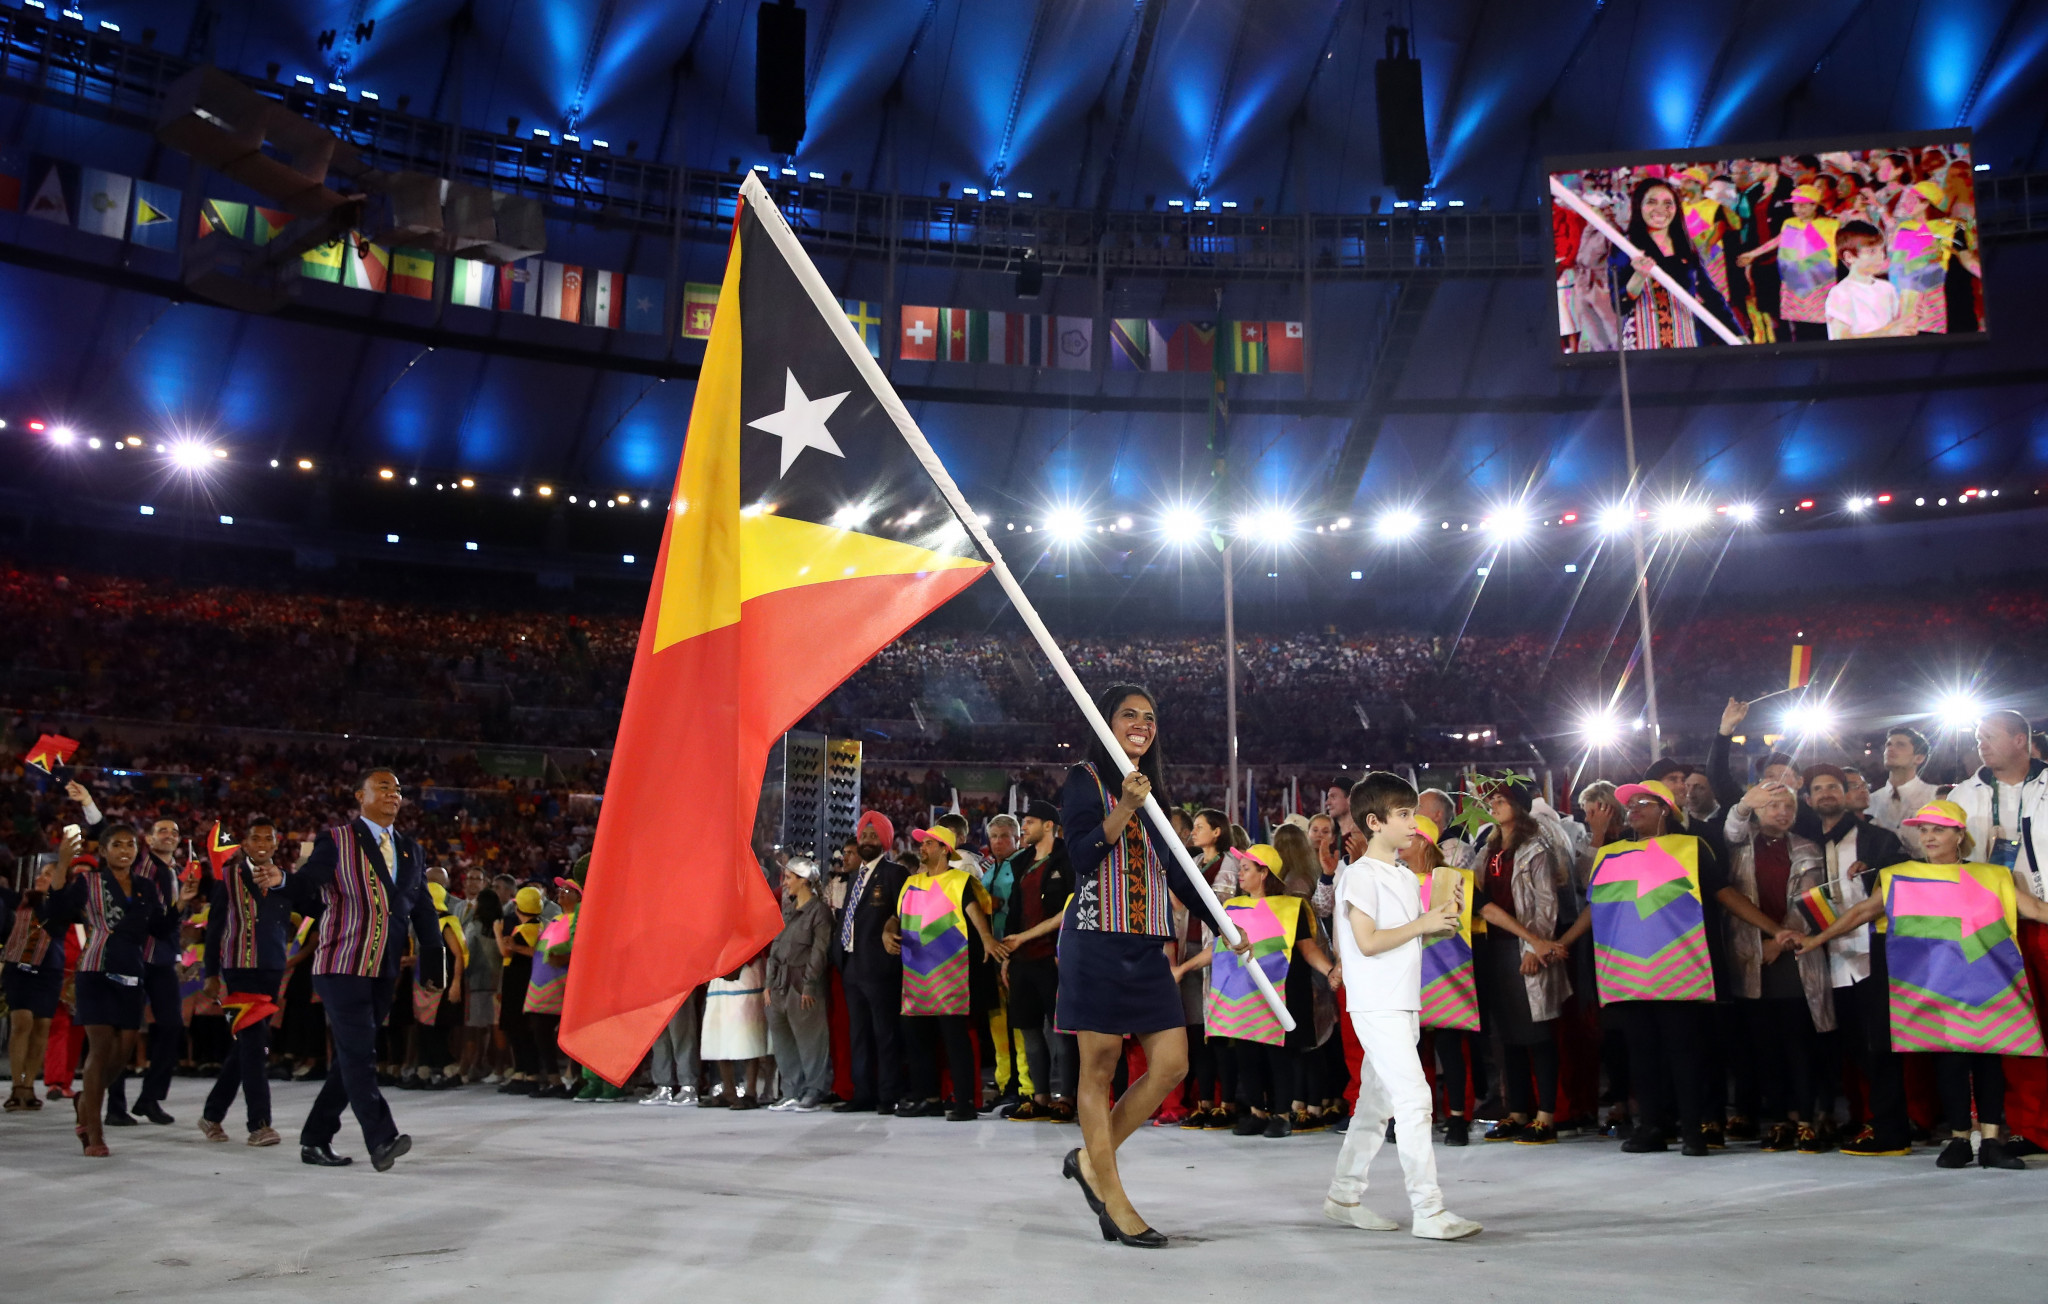 Timor Leste has competed at every Summer Olympics since Sydney 2000 but has never won a medal ©Getty Images